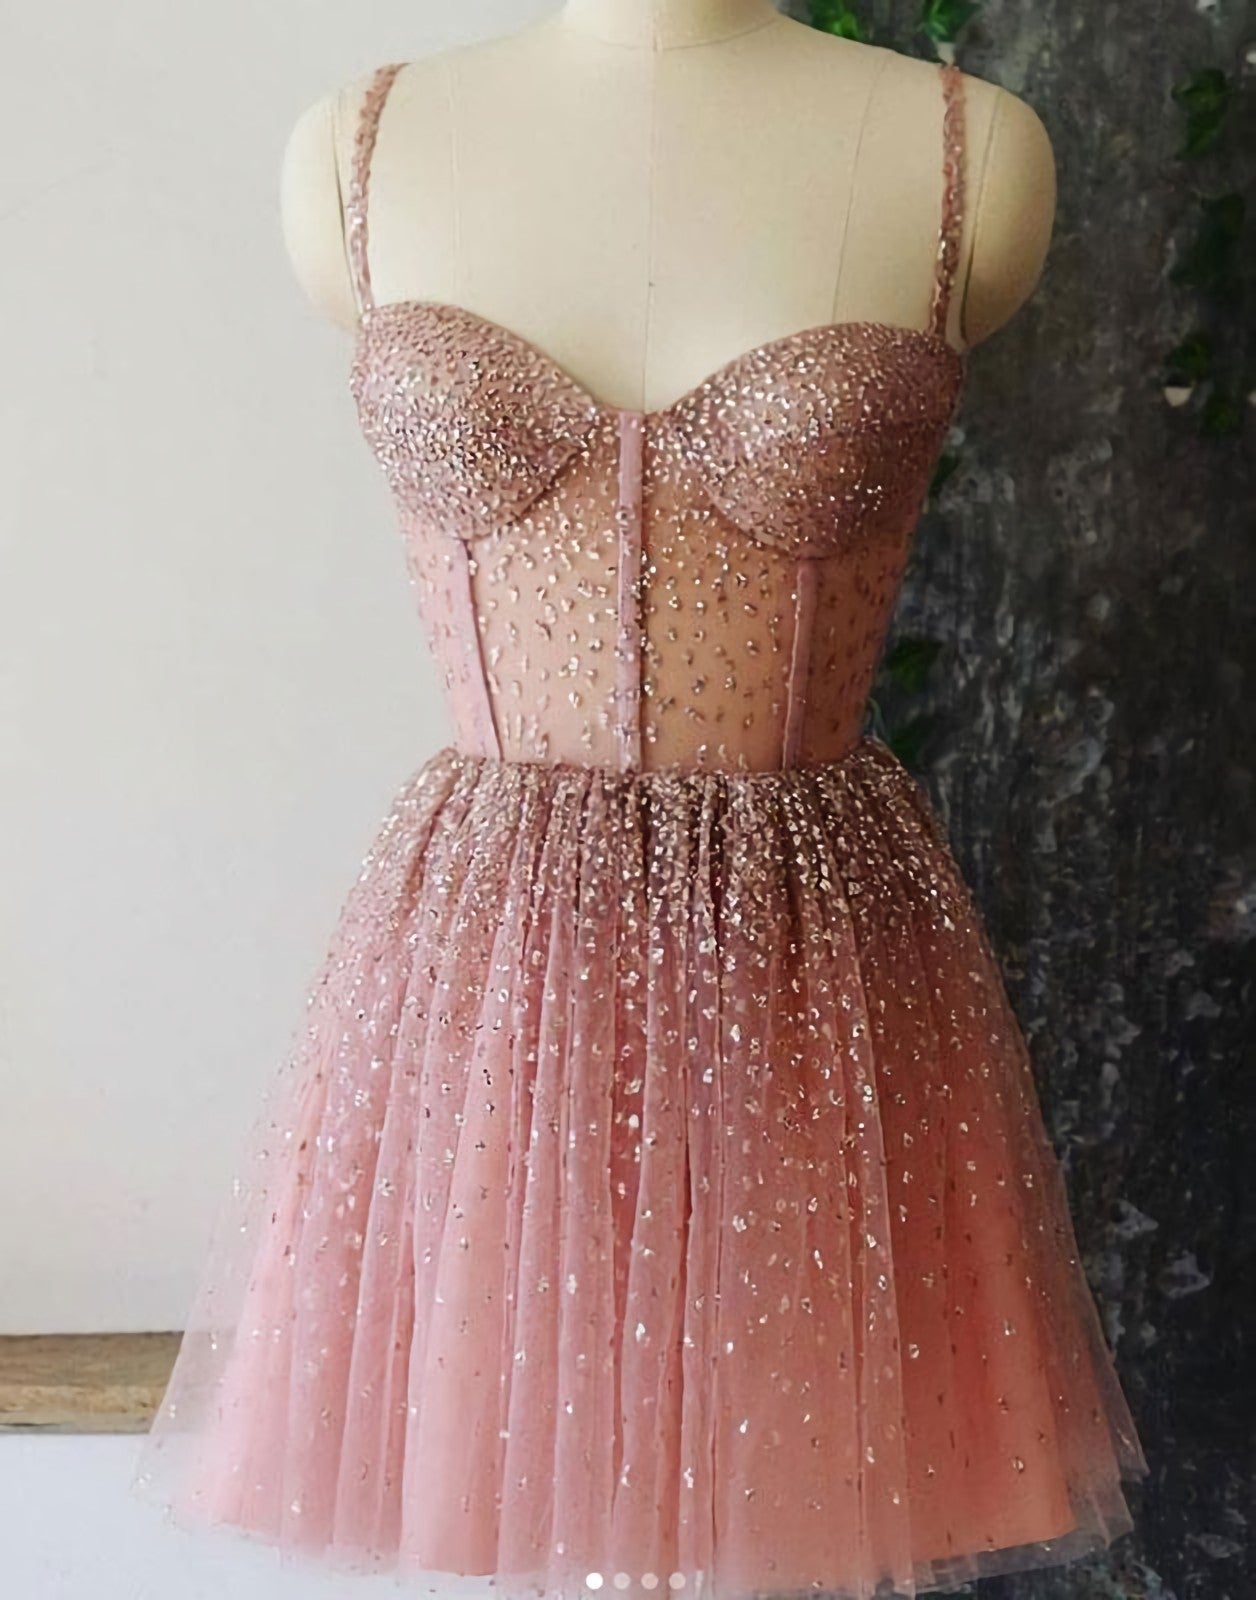 Prom Dresses Long Beautiful, A Line Spaghetti Straps Short Dresses, Dusty Pink Beaded Homecoming Dress